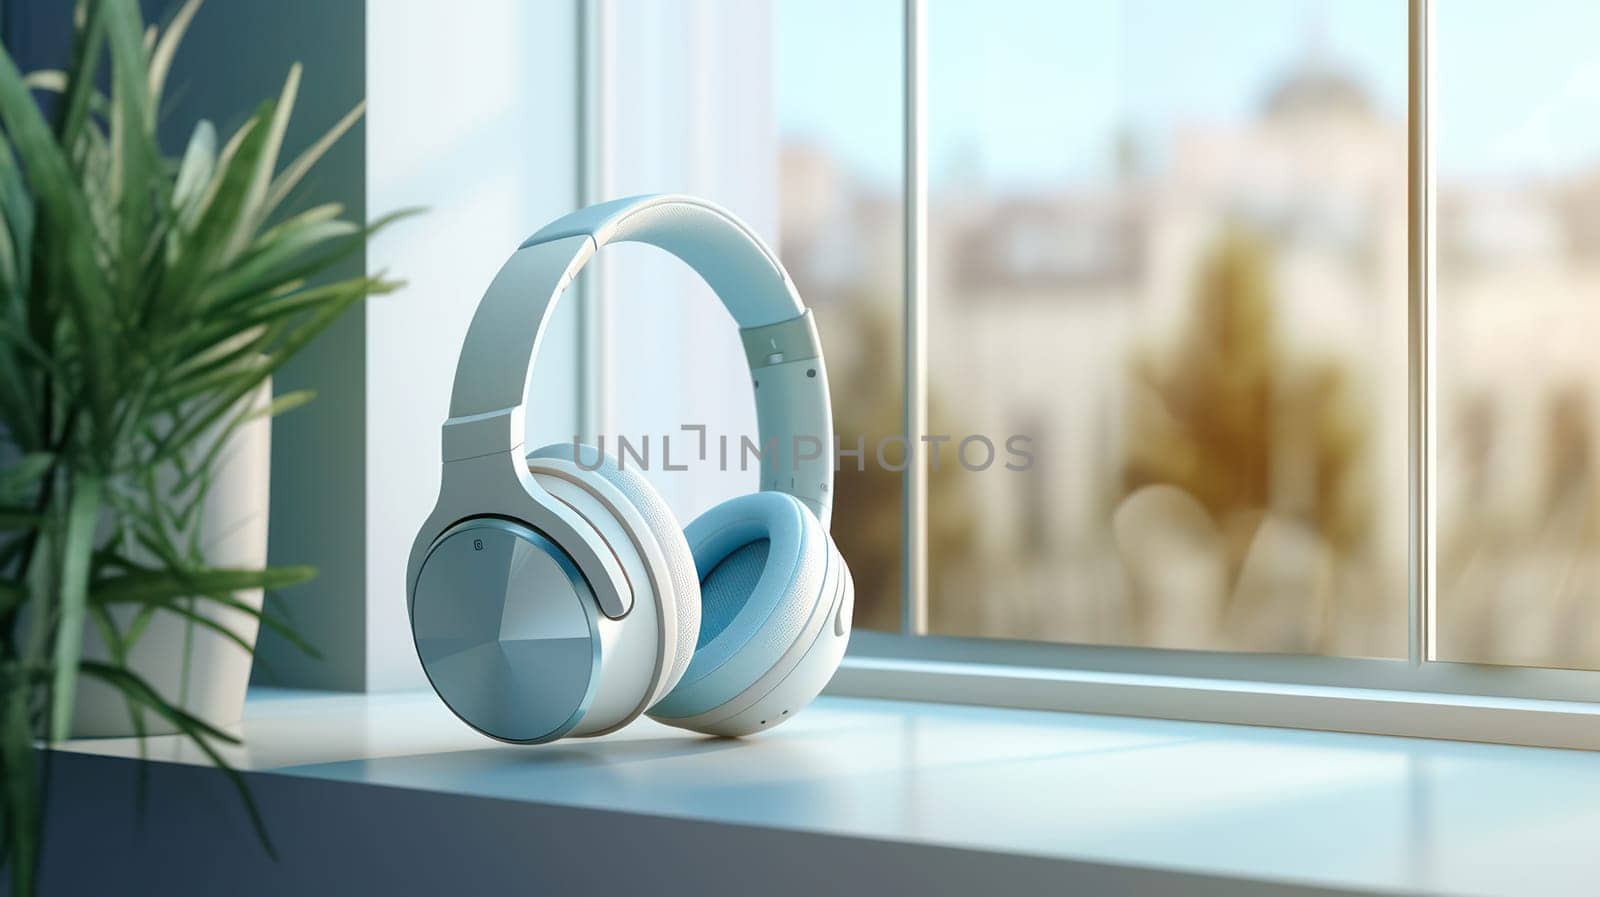 Modern Musical Entertainment: Isolated White Stereo Headset for Digital Audio Devices. by Vichizh